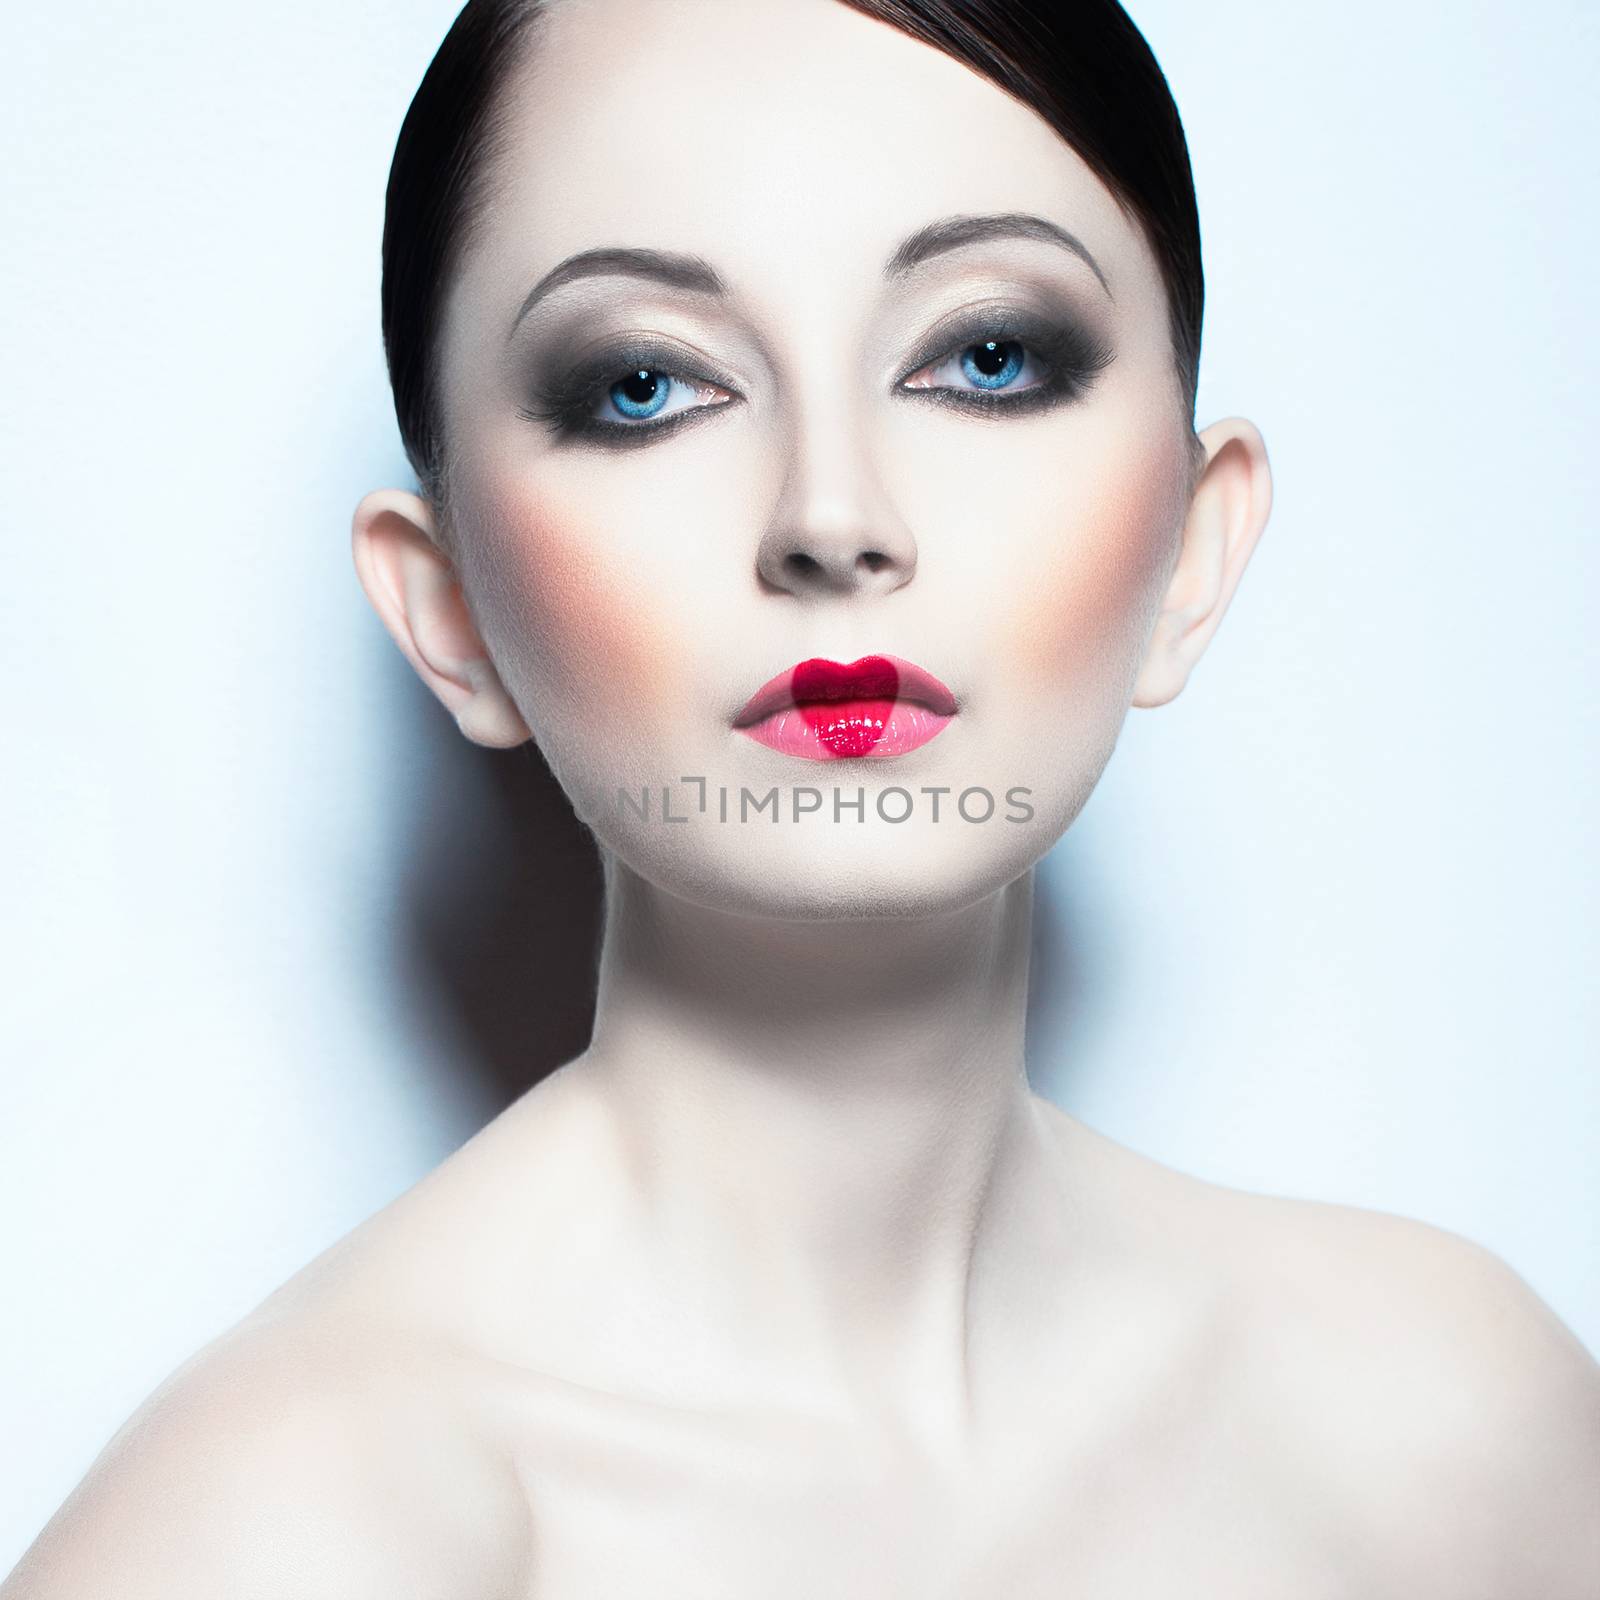 Portrait of a beautiful woman like doll with a glamorous cool ma by vlad_star